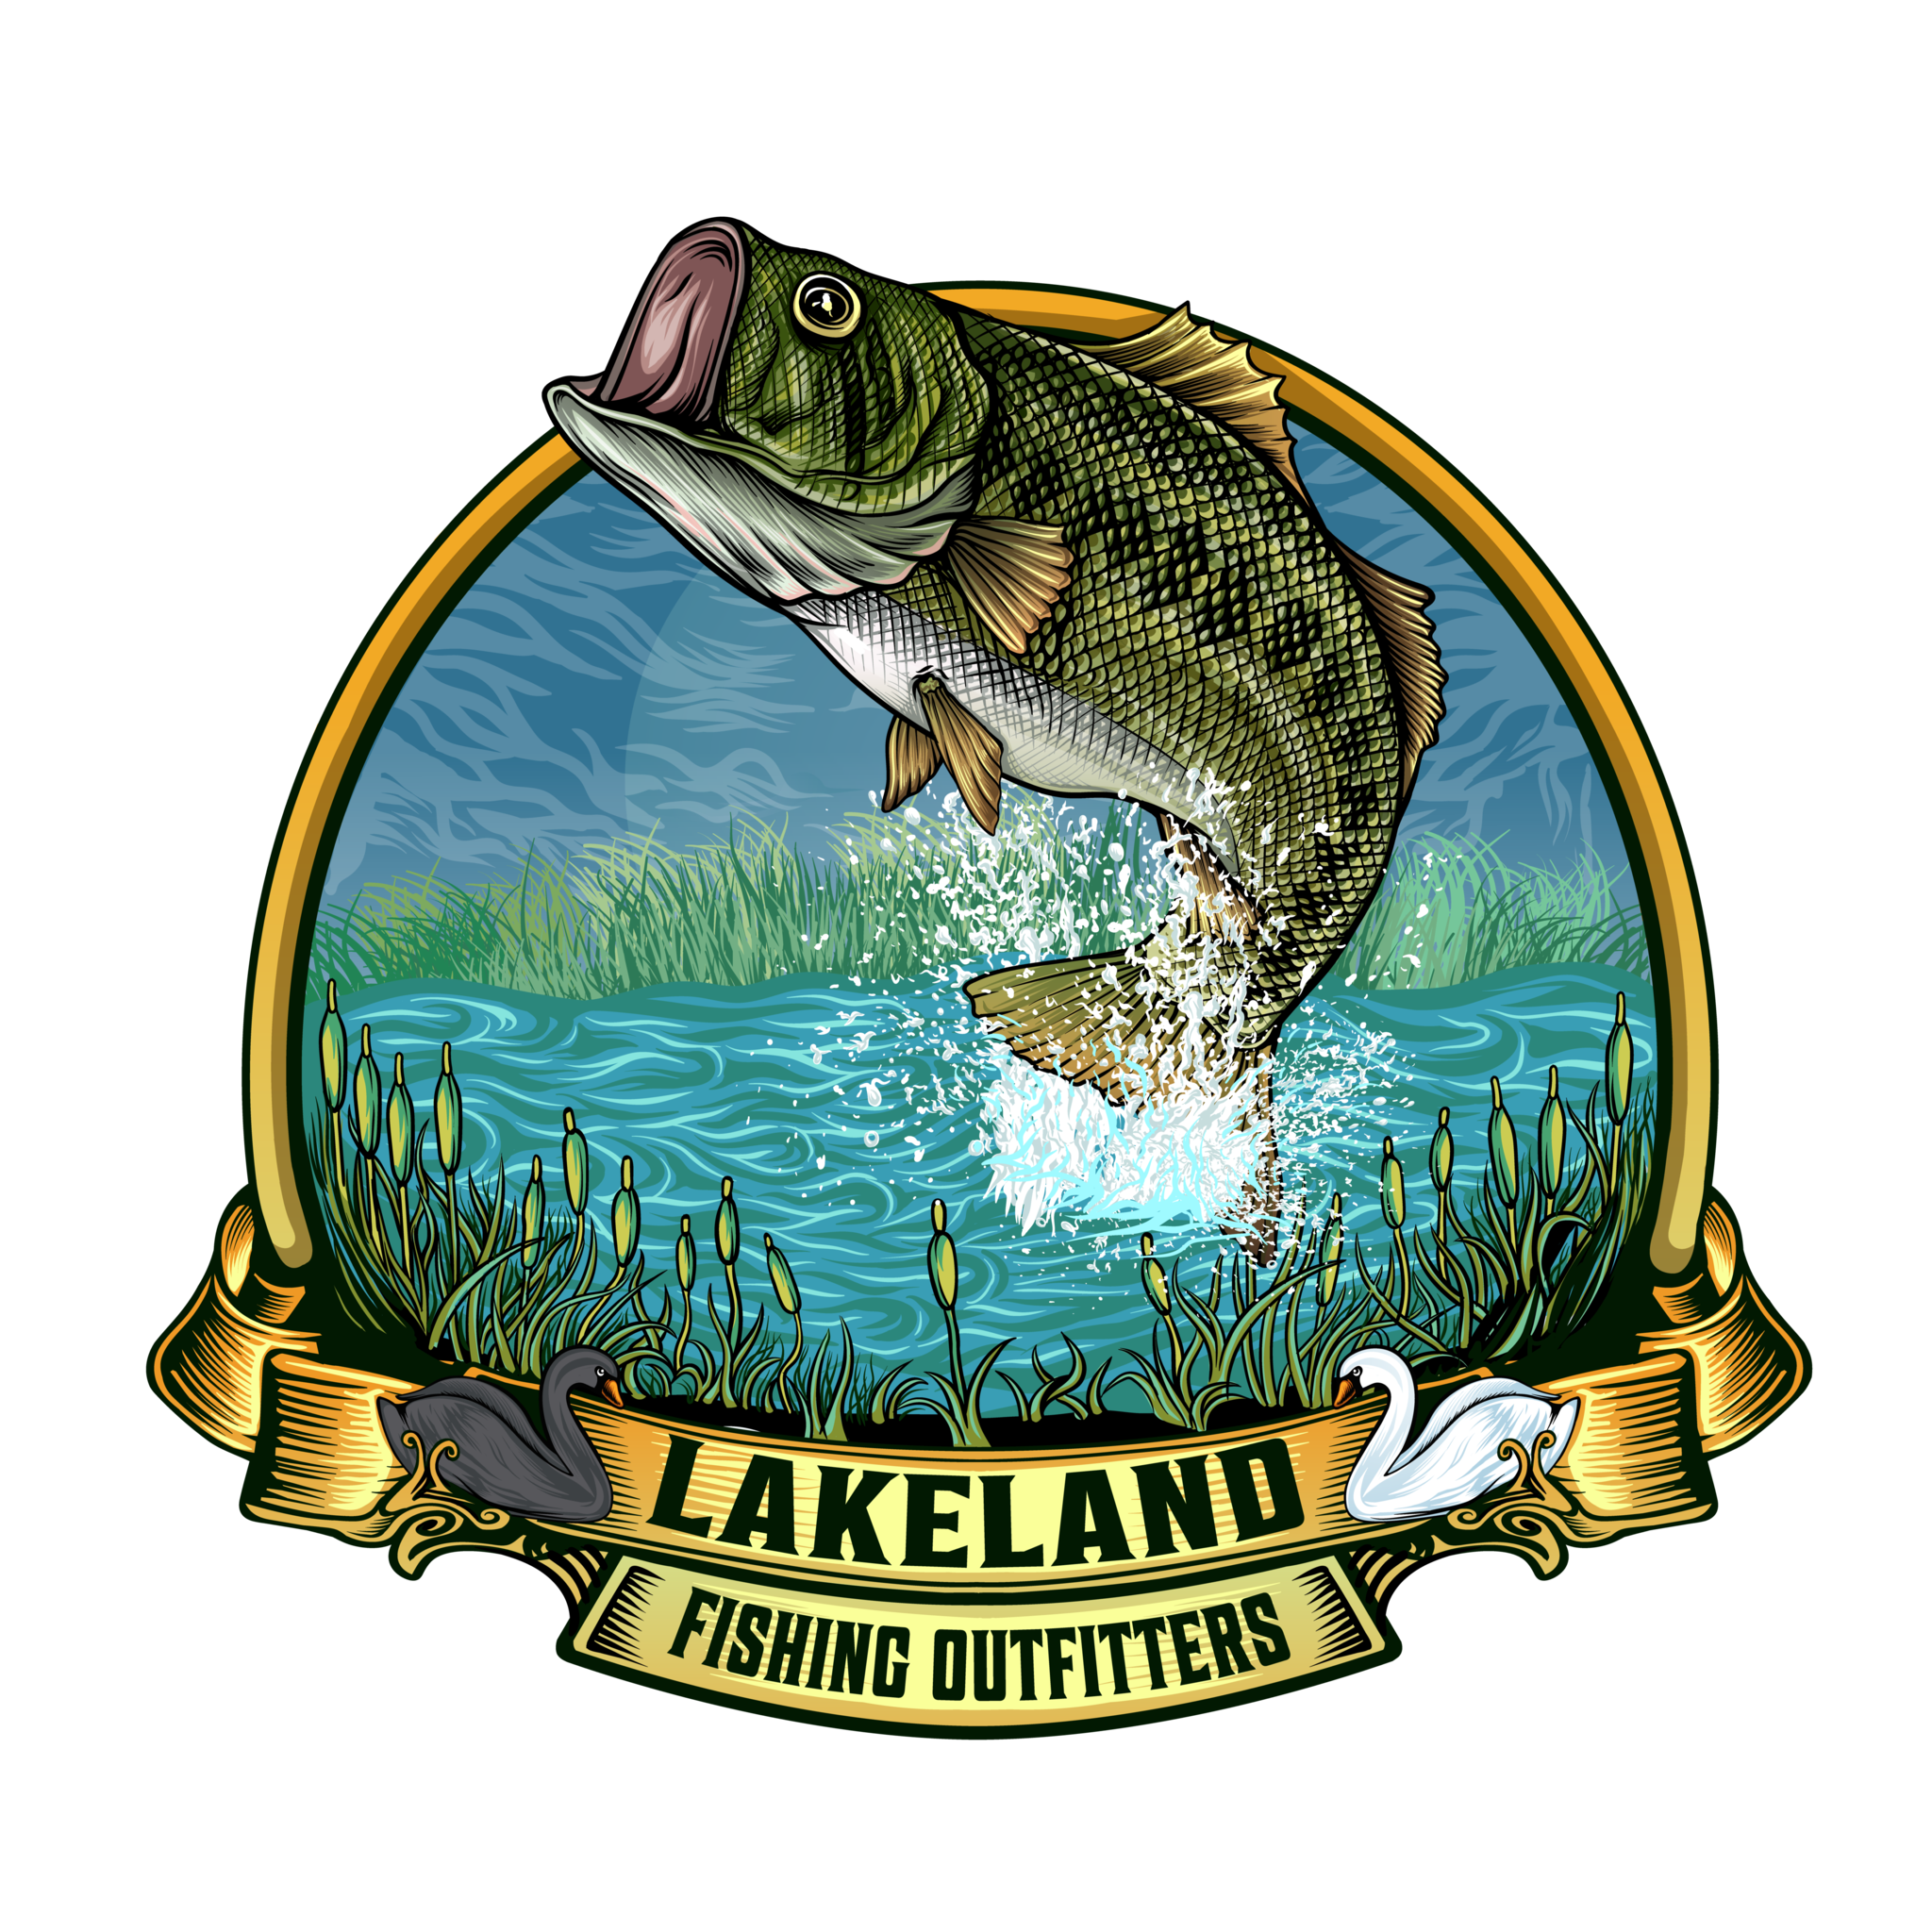 Lakeland Fishing Outfitters Tackle Shop - Florida Fishing Outfitters